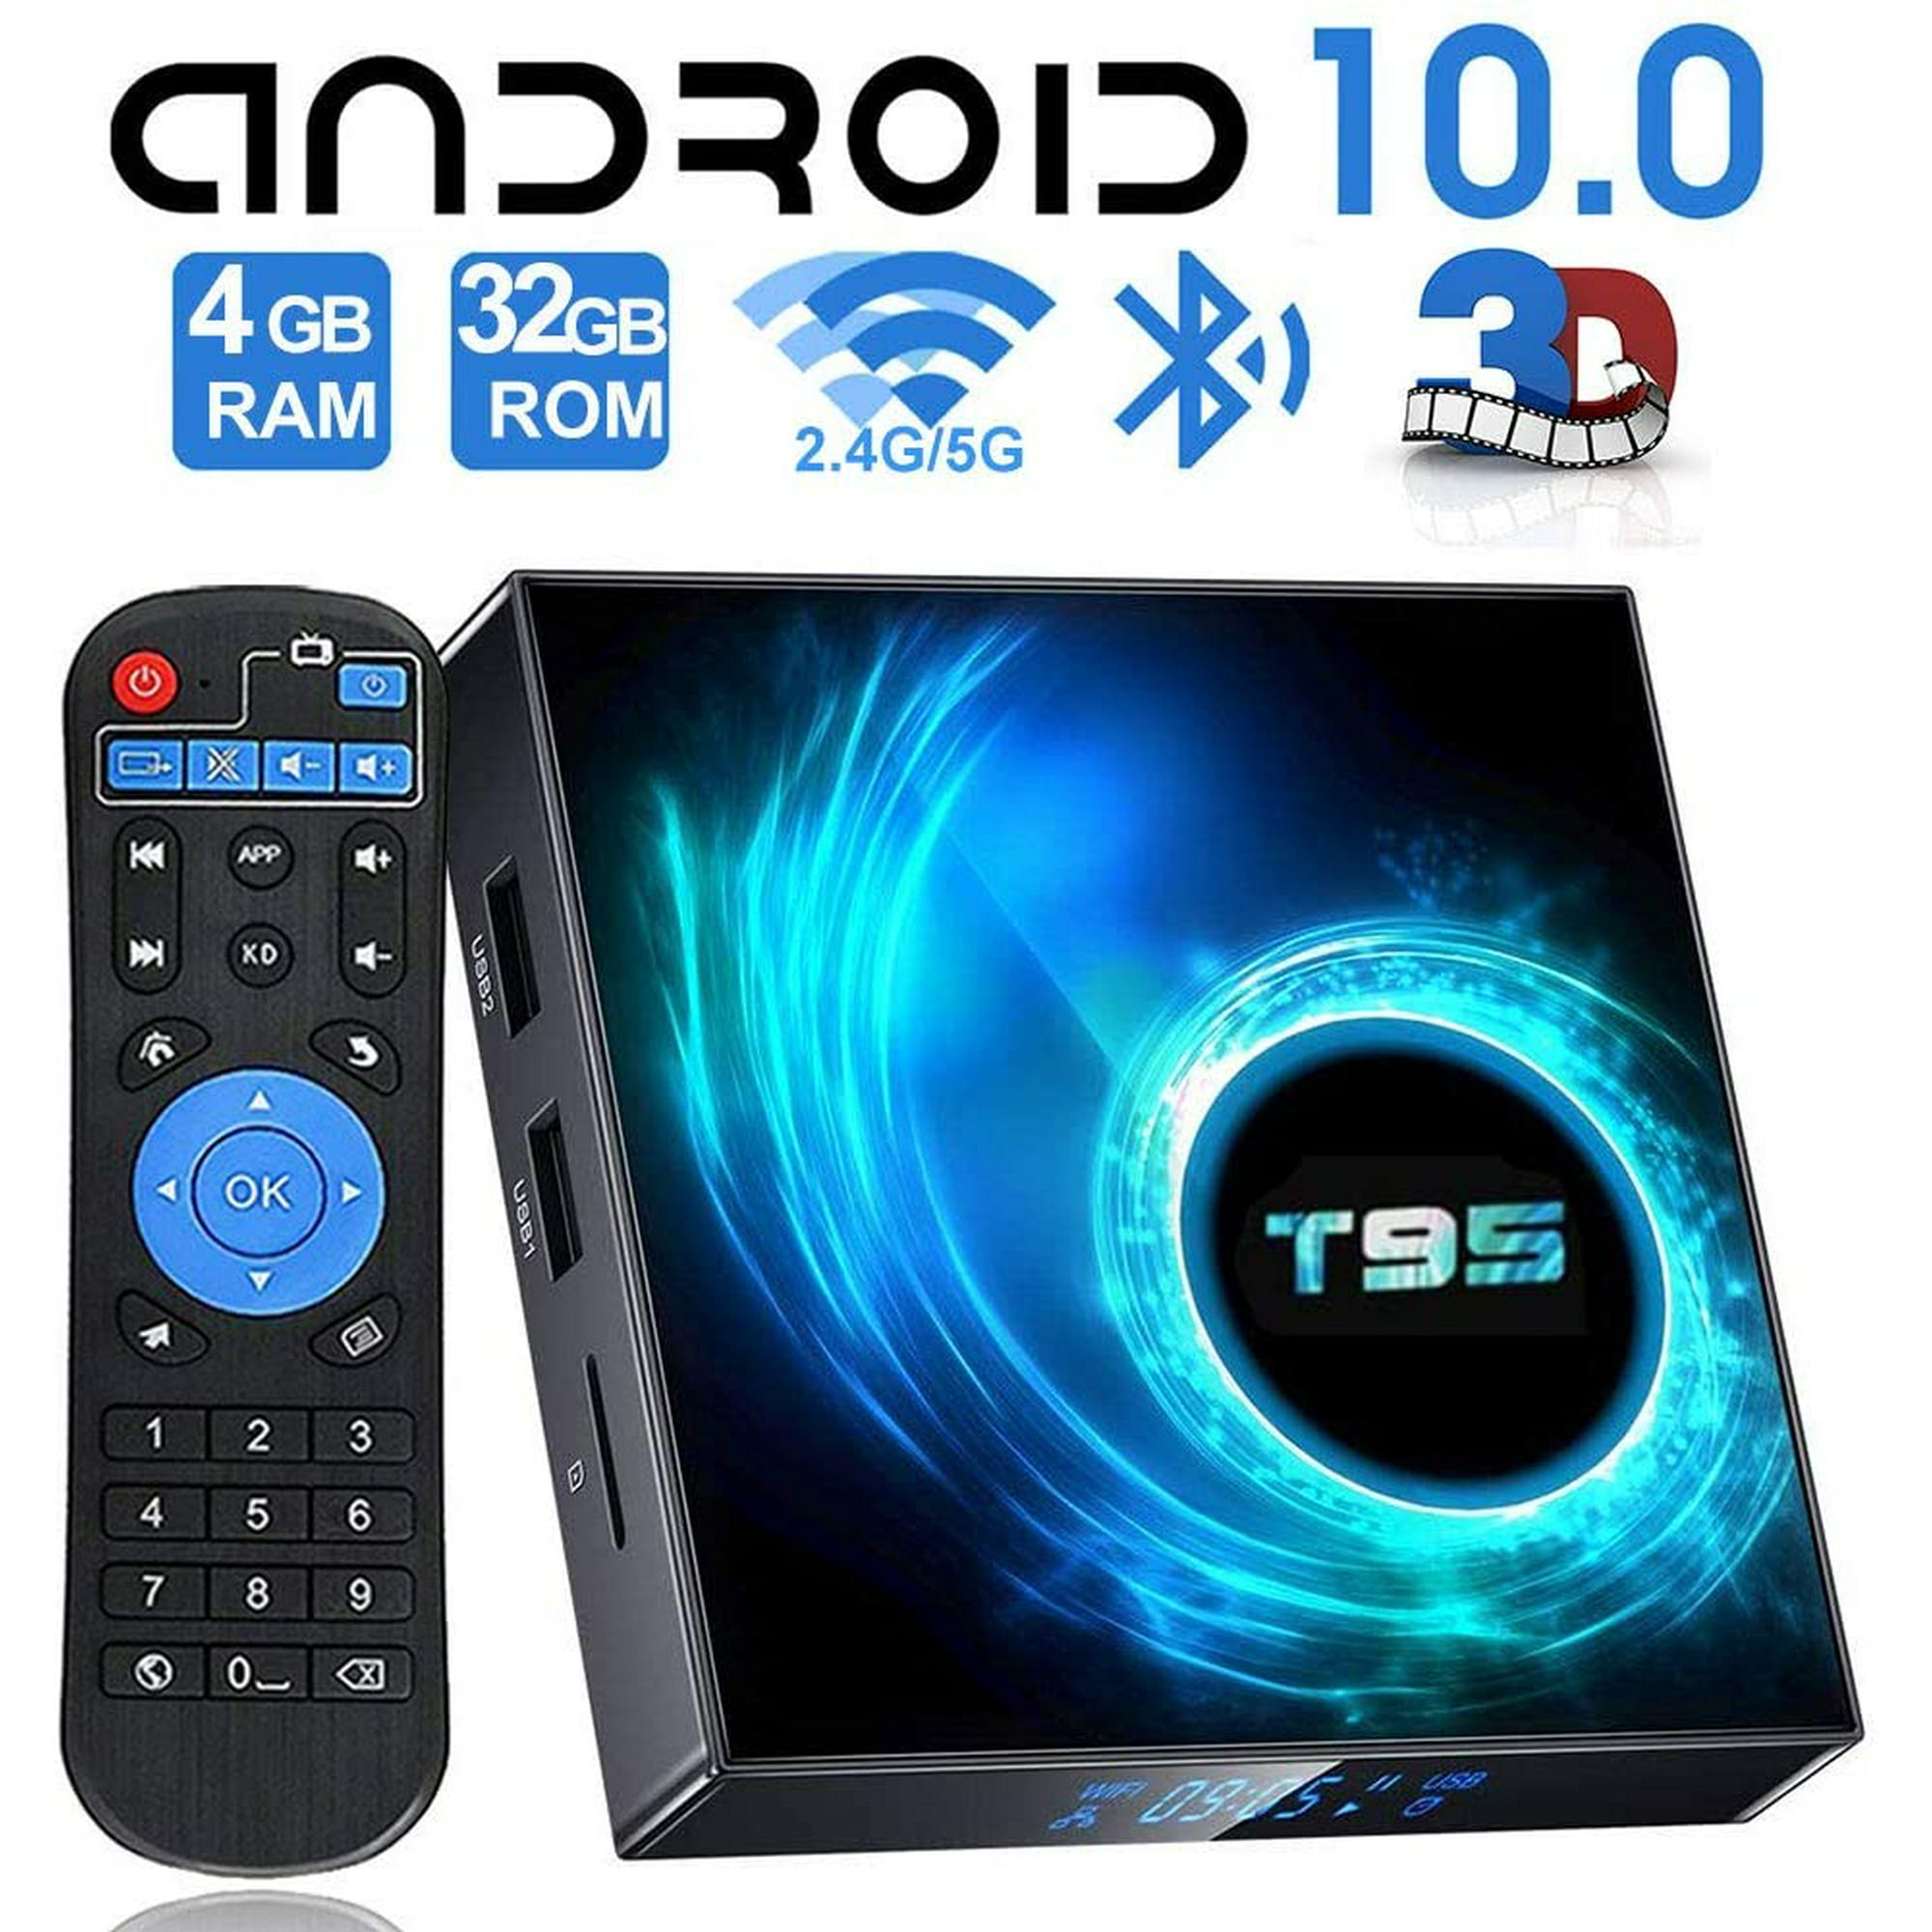 cushion Career coal Android 10 TV Box, EASYTONE T95 Android TV Box with 4GB RAM 32GB ROM H616  Quad-core Chips, Support 2.4G/5G Dual-Band | Walmart Canada